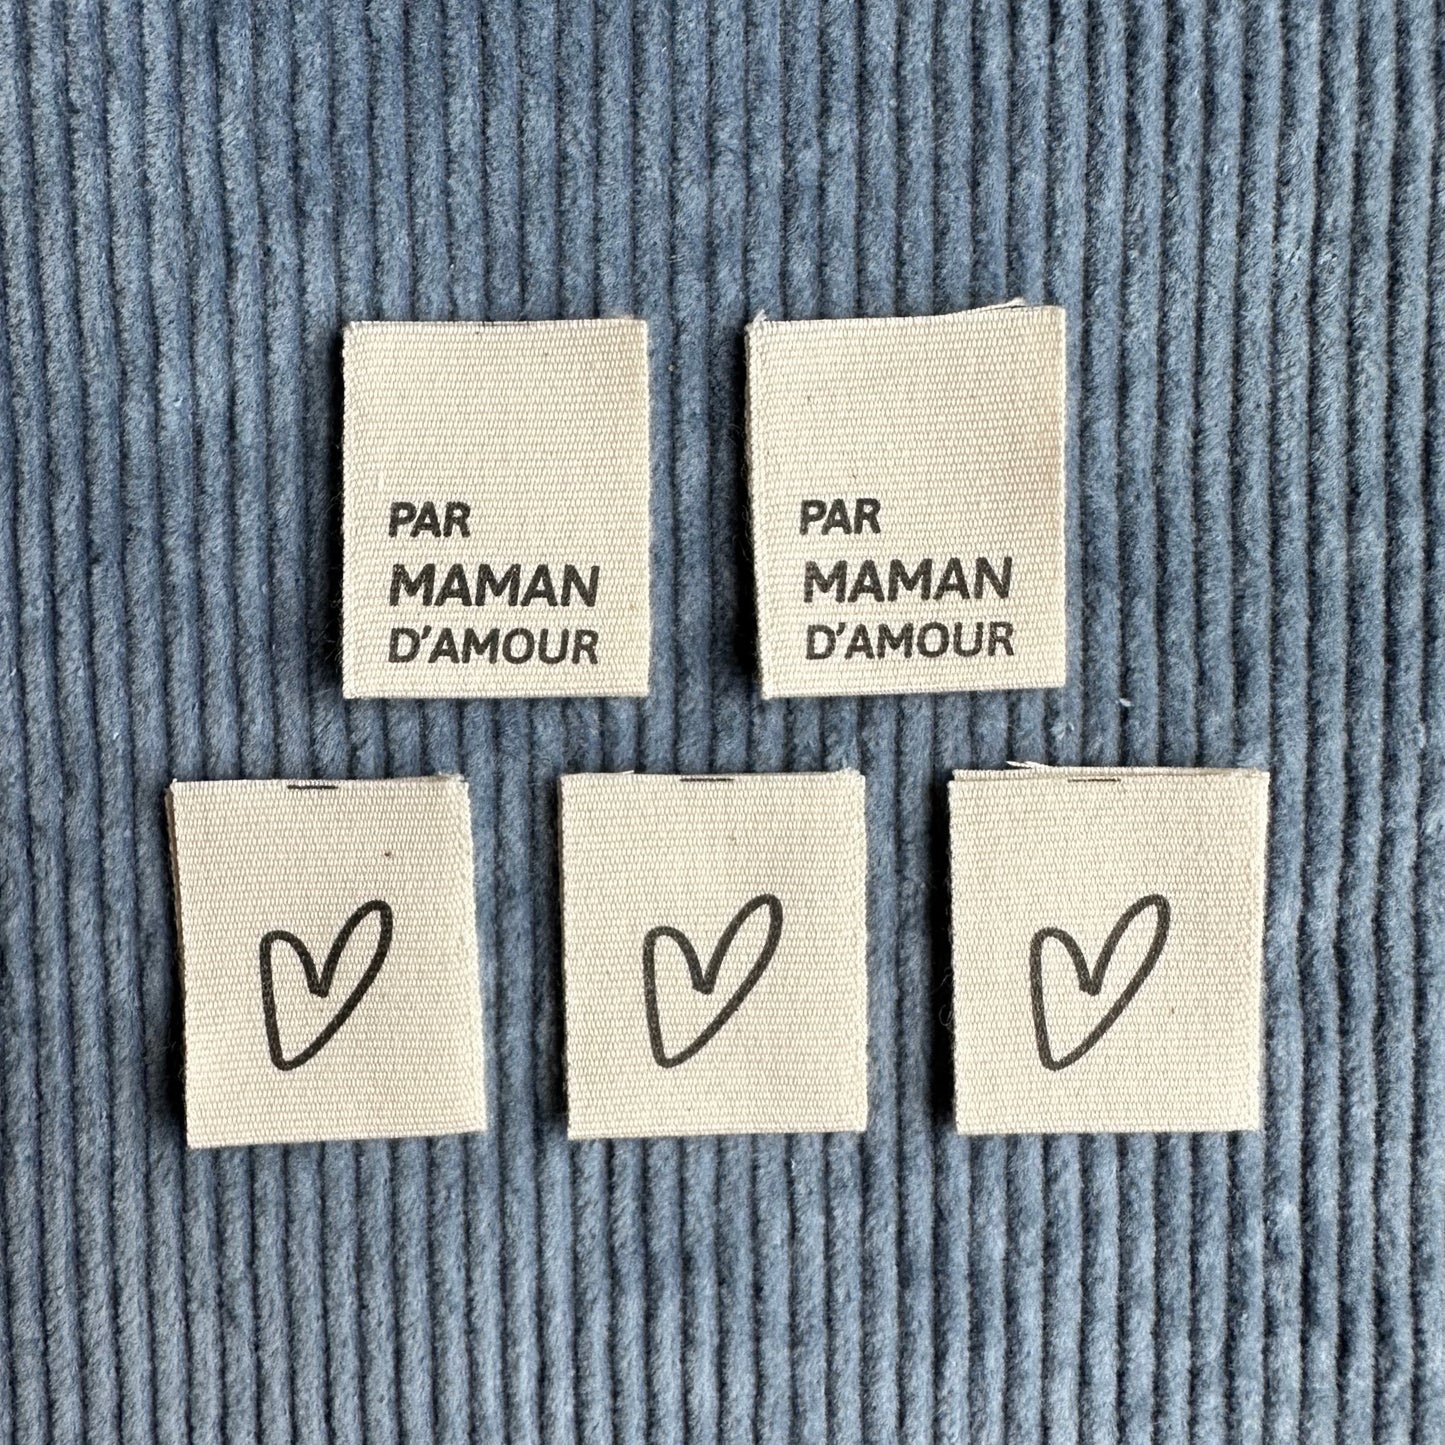 BY MAMAN D'AMOUR - Cotton labels in French